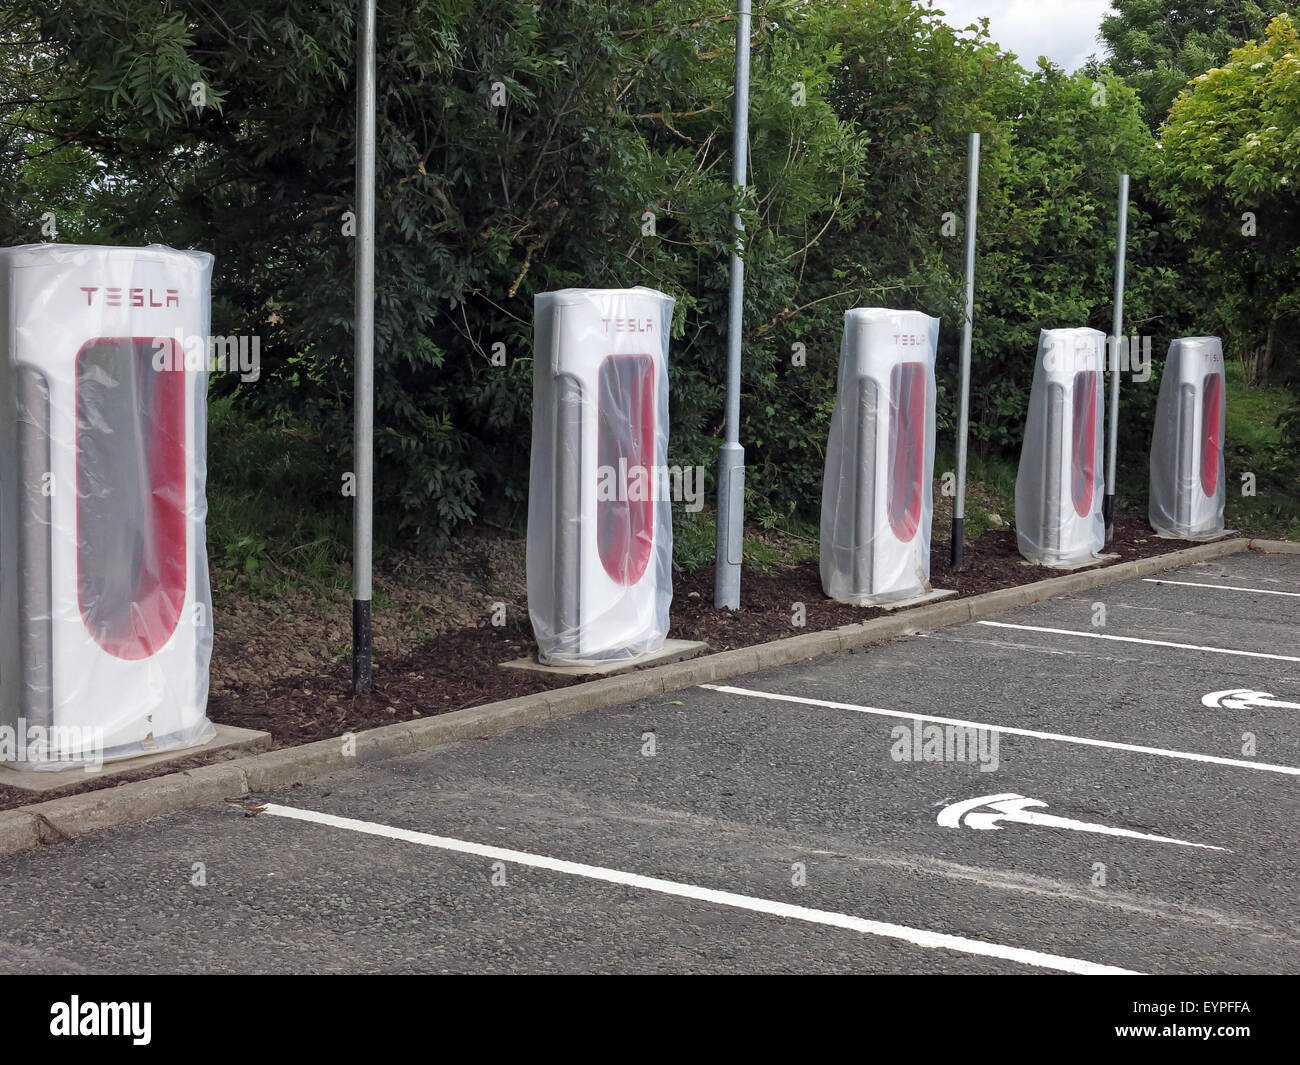 Tesla charging points being implemented on a motorway service area in the UK Stock Photo